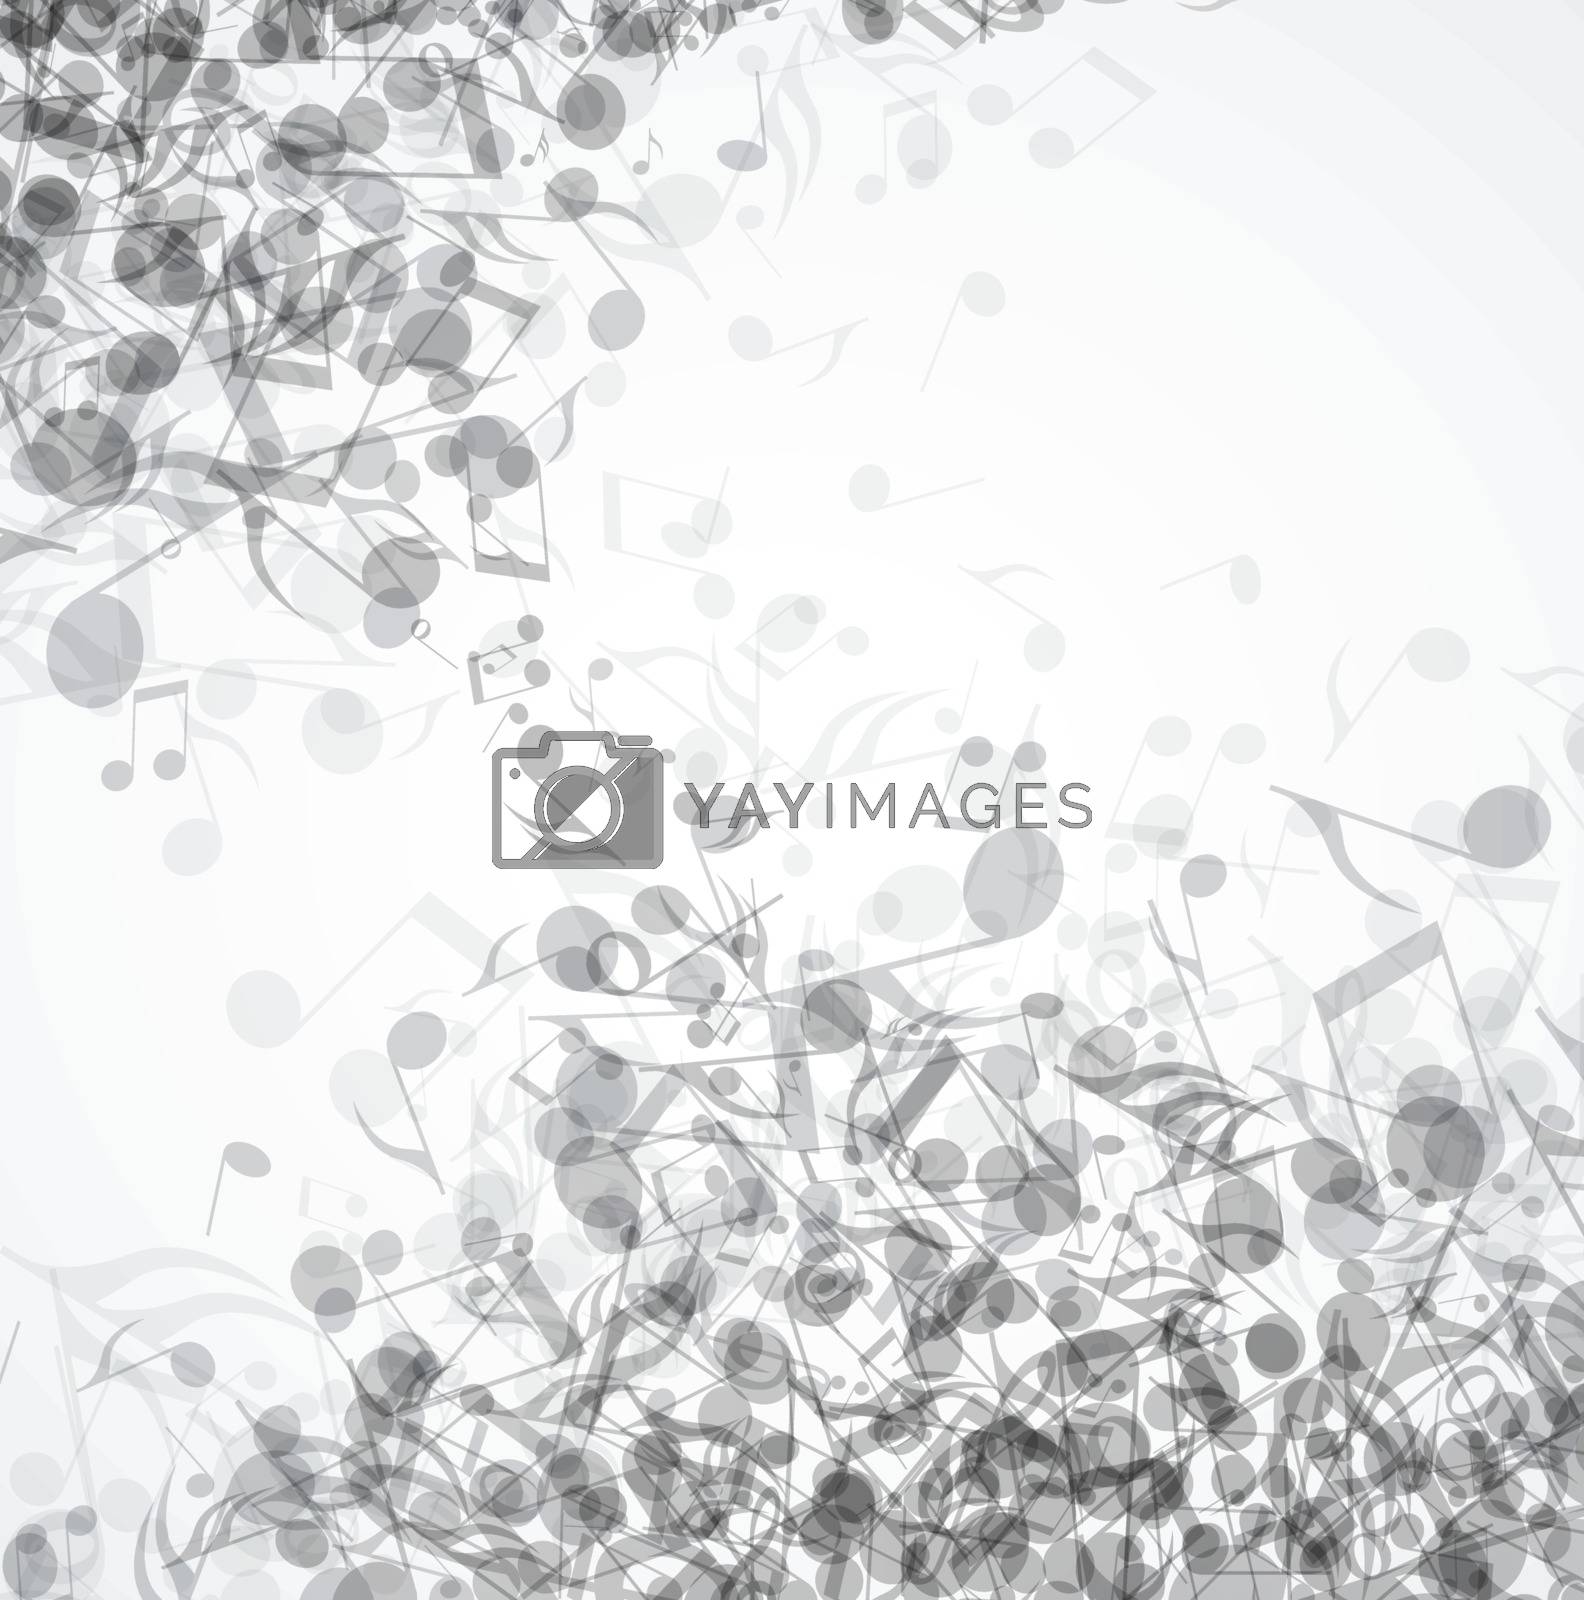 Royalty free image of musical background by odina222